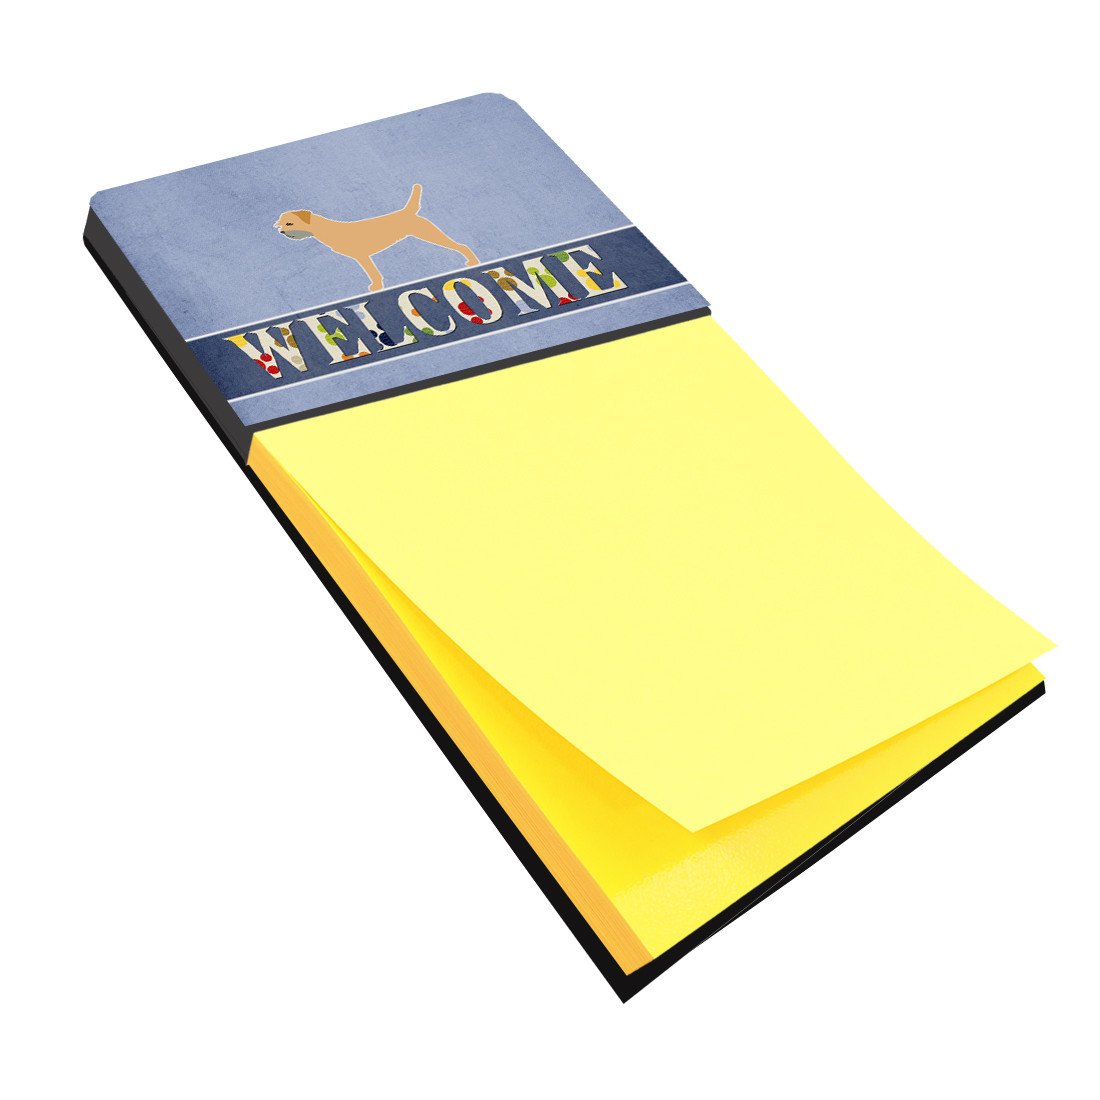 Border Terrier Welcome Sticky Note Holder BB5493SN by Caroline's Treasures